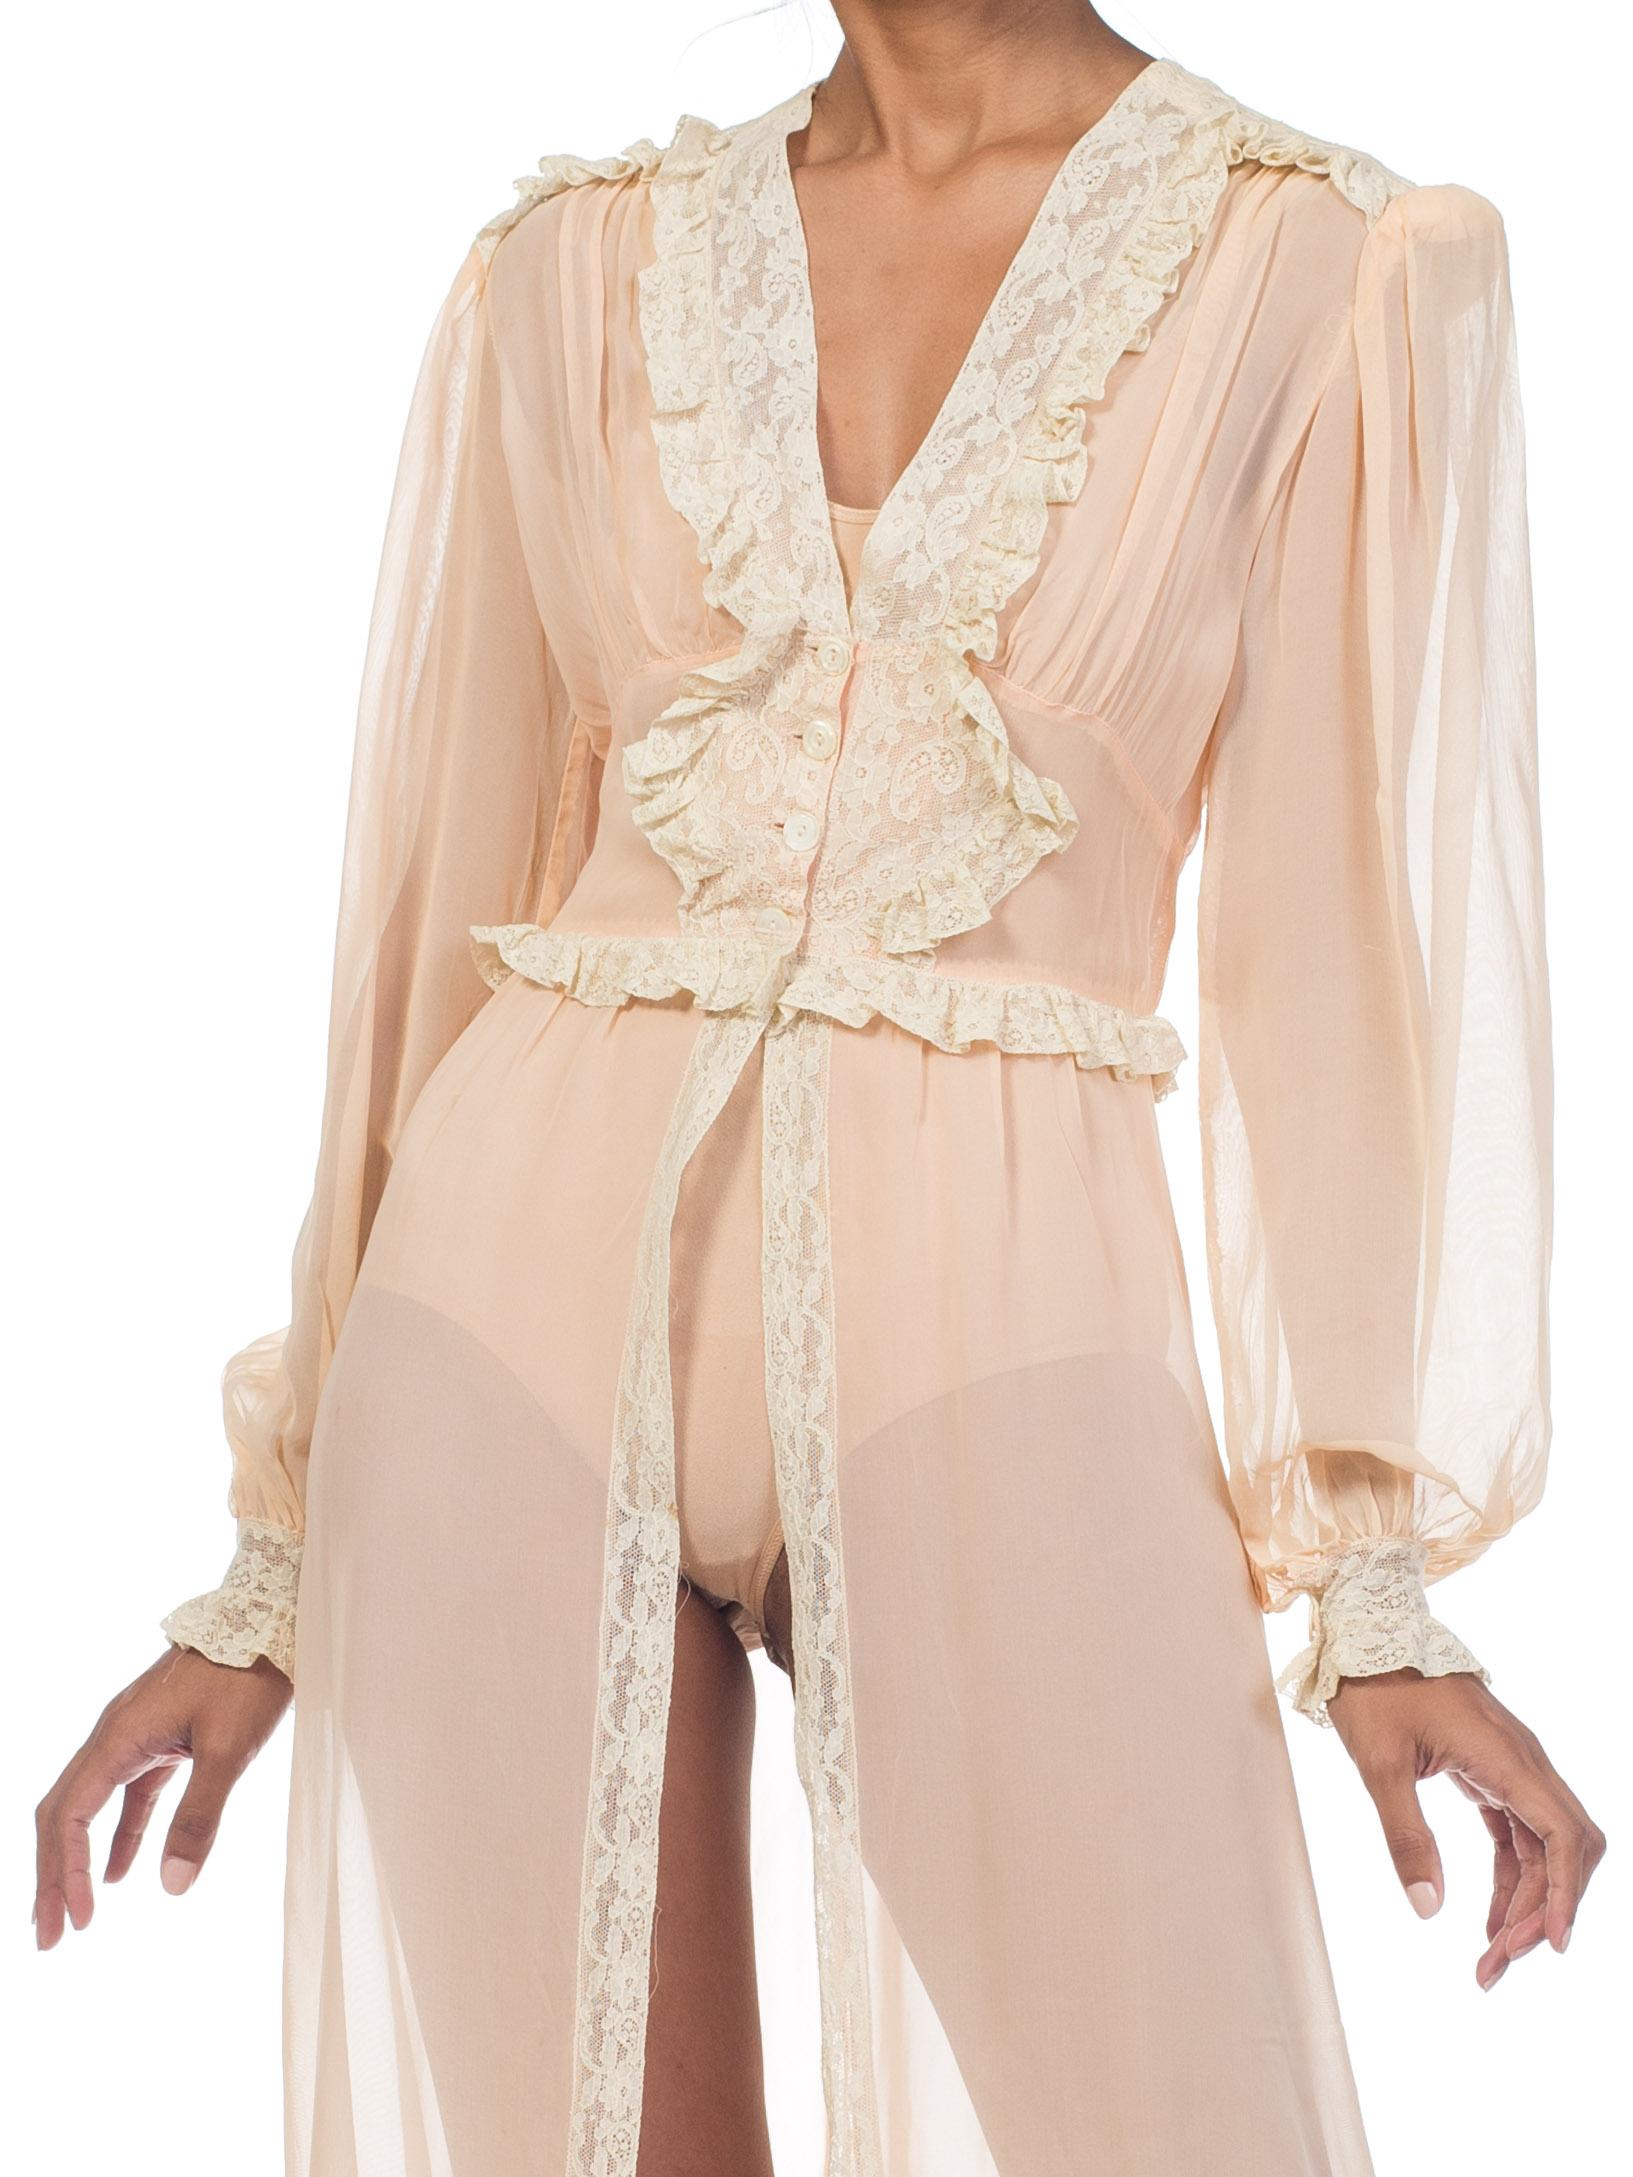 1940S Blush Pink Rayon Chiffon Sheer Peignoir Robe With Lace Ruffles & Mother O For Sale 6